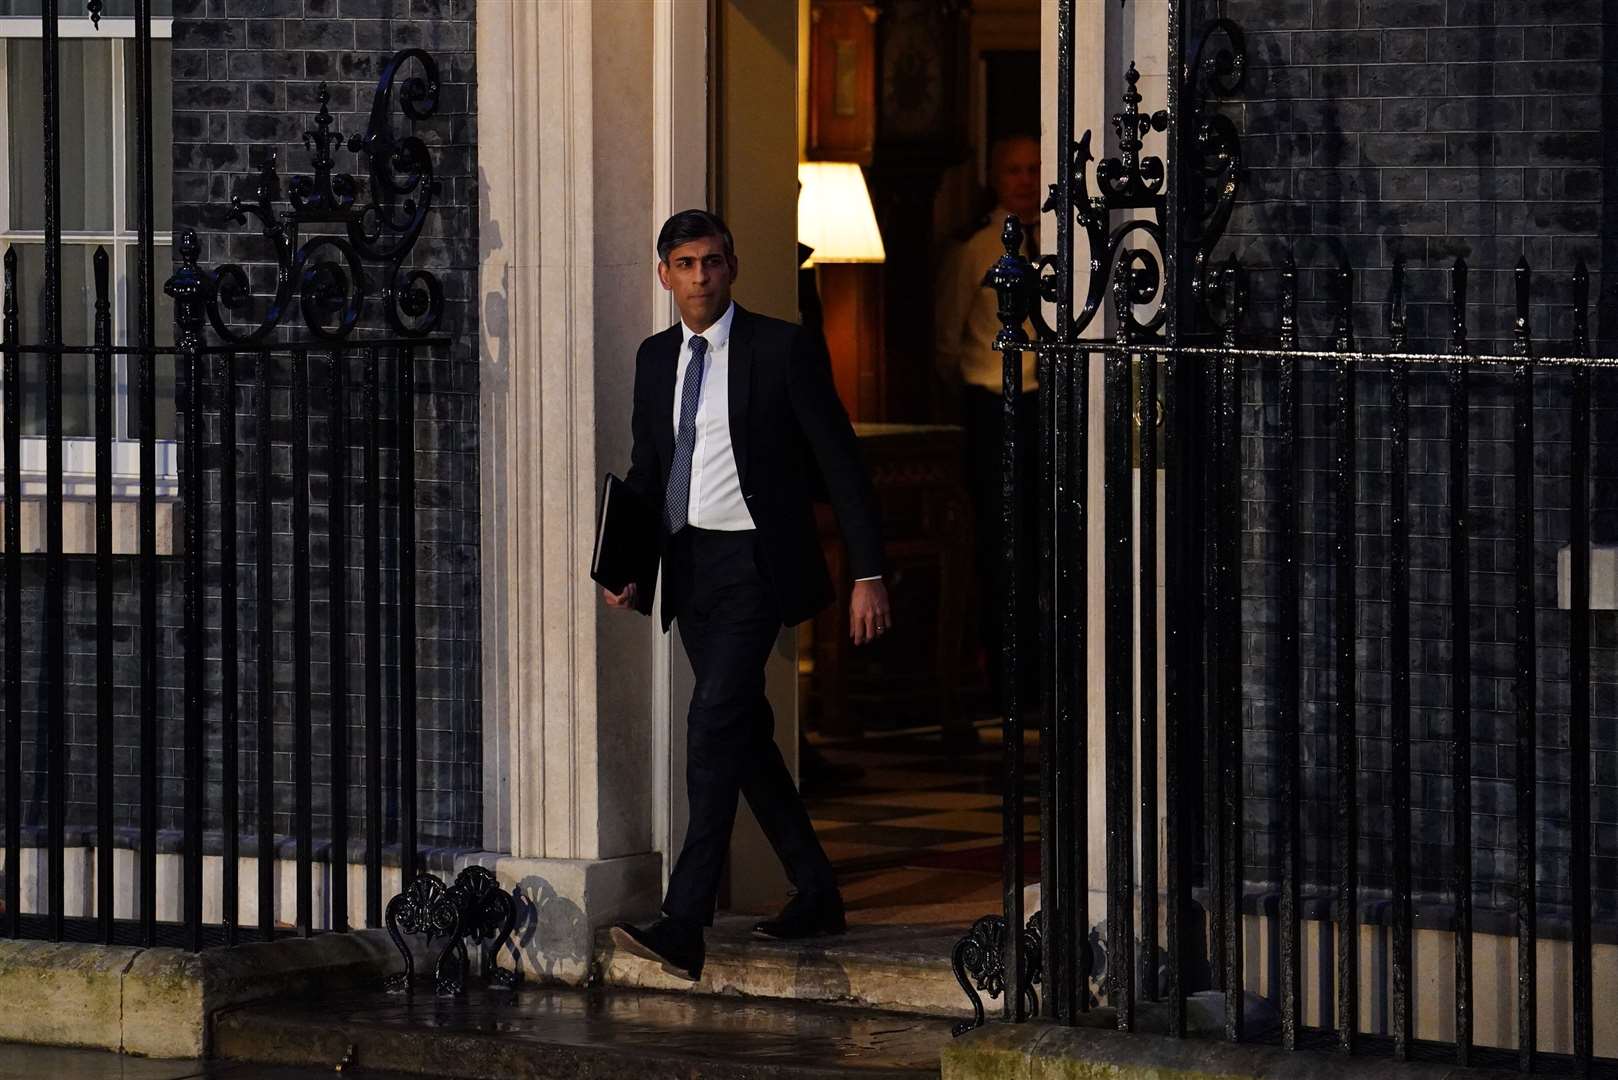 Prime Minister Rishi Sunak opted to give his address about extremism in Downing Street (Jordan Pettitt/PA)